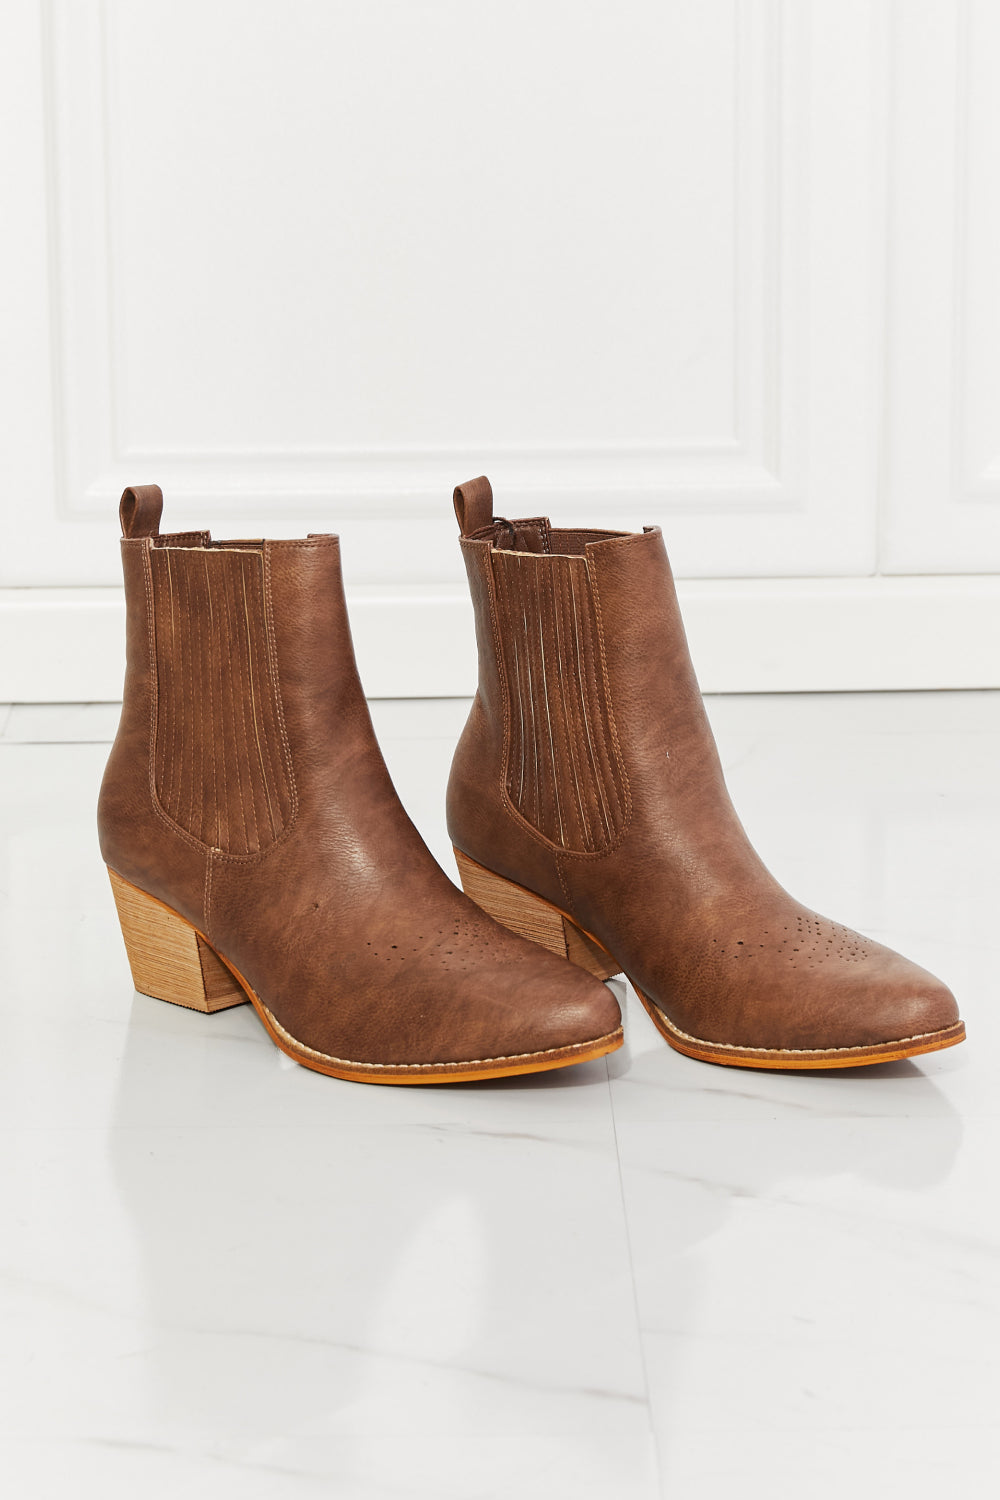 MMShoes Love the Journey Stacked Heel Chelsea Boot in Chestnut - nailedmoms